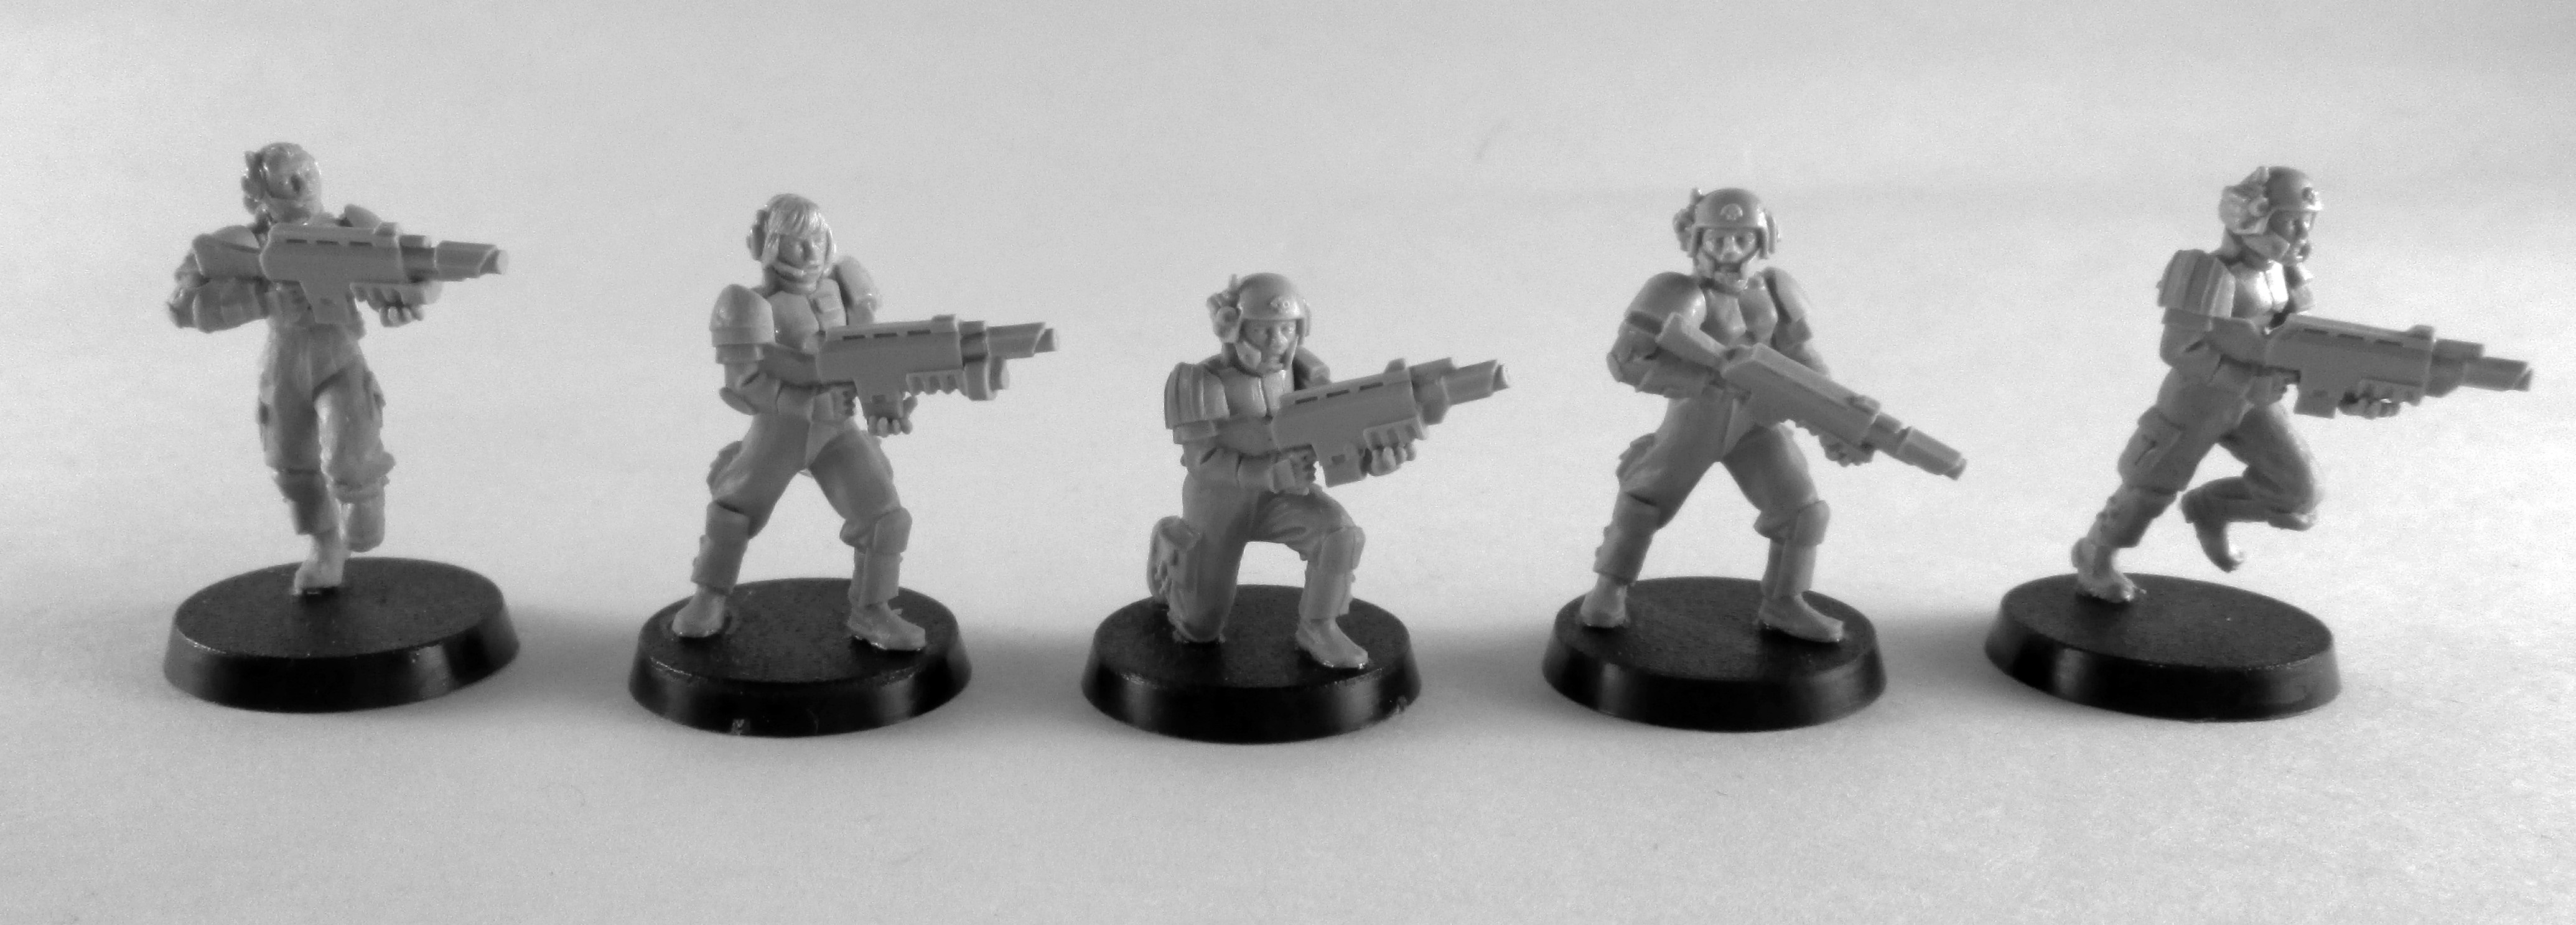 Check It Out: Female Sci-Fi Soldiers Set